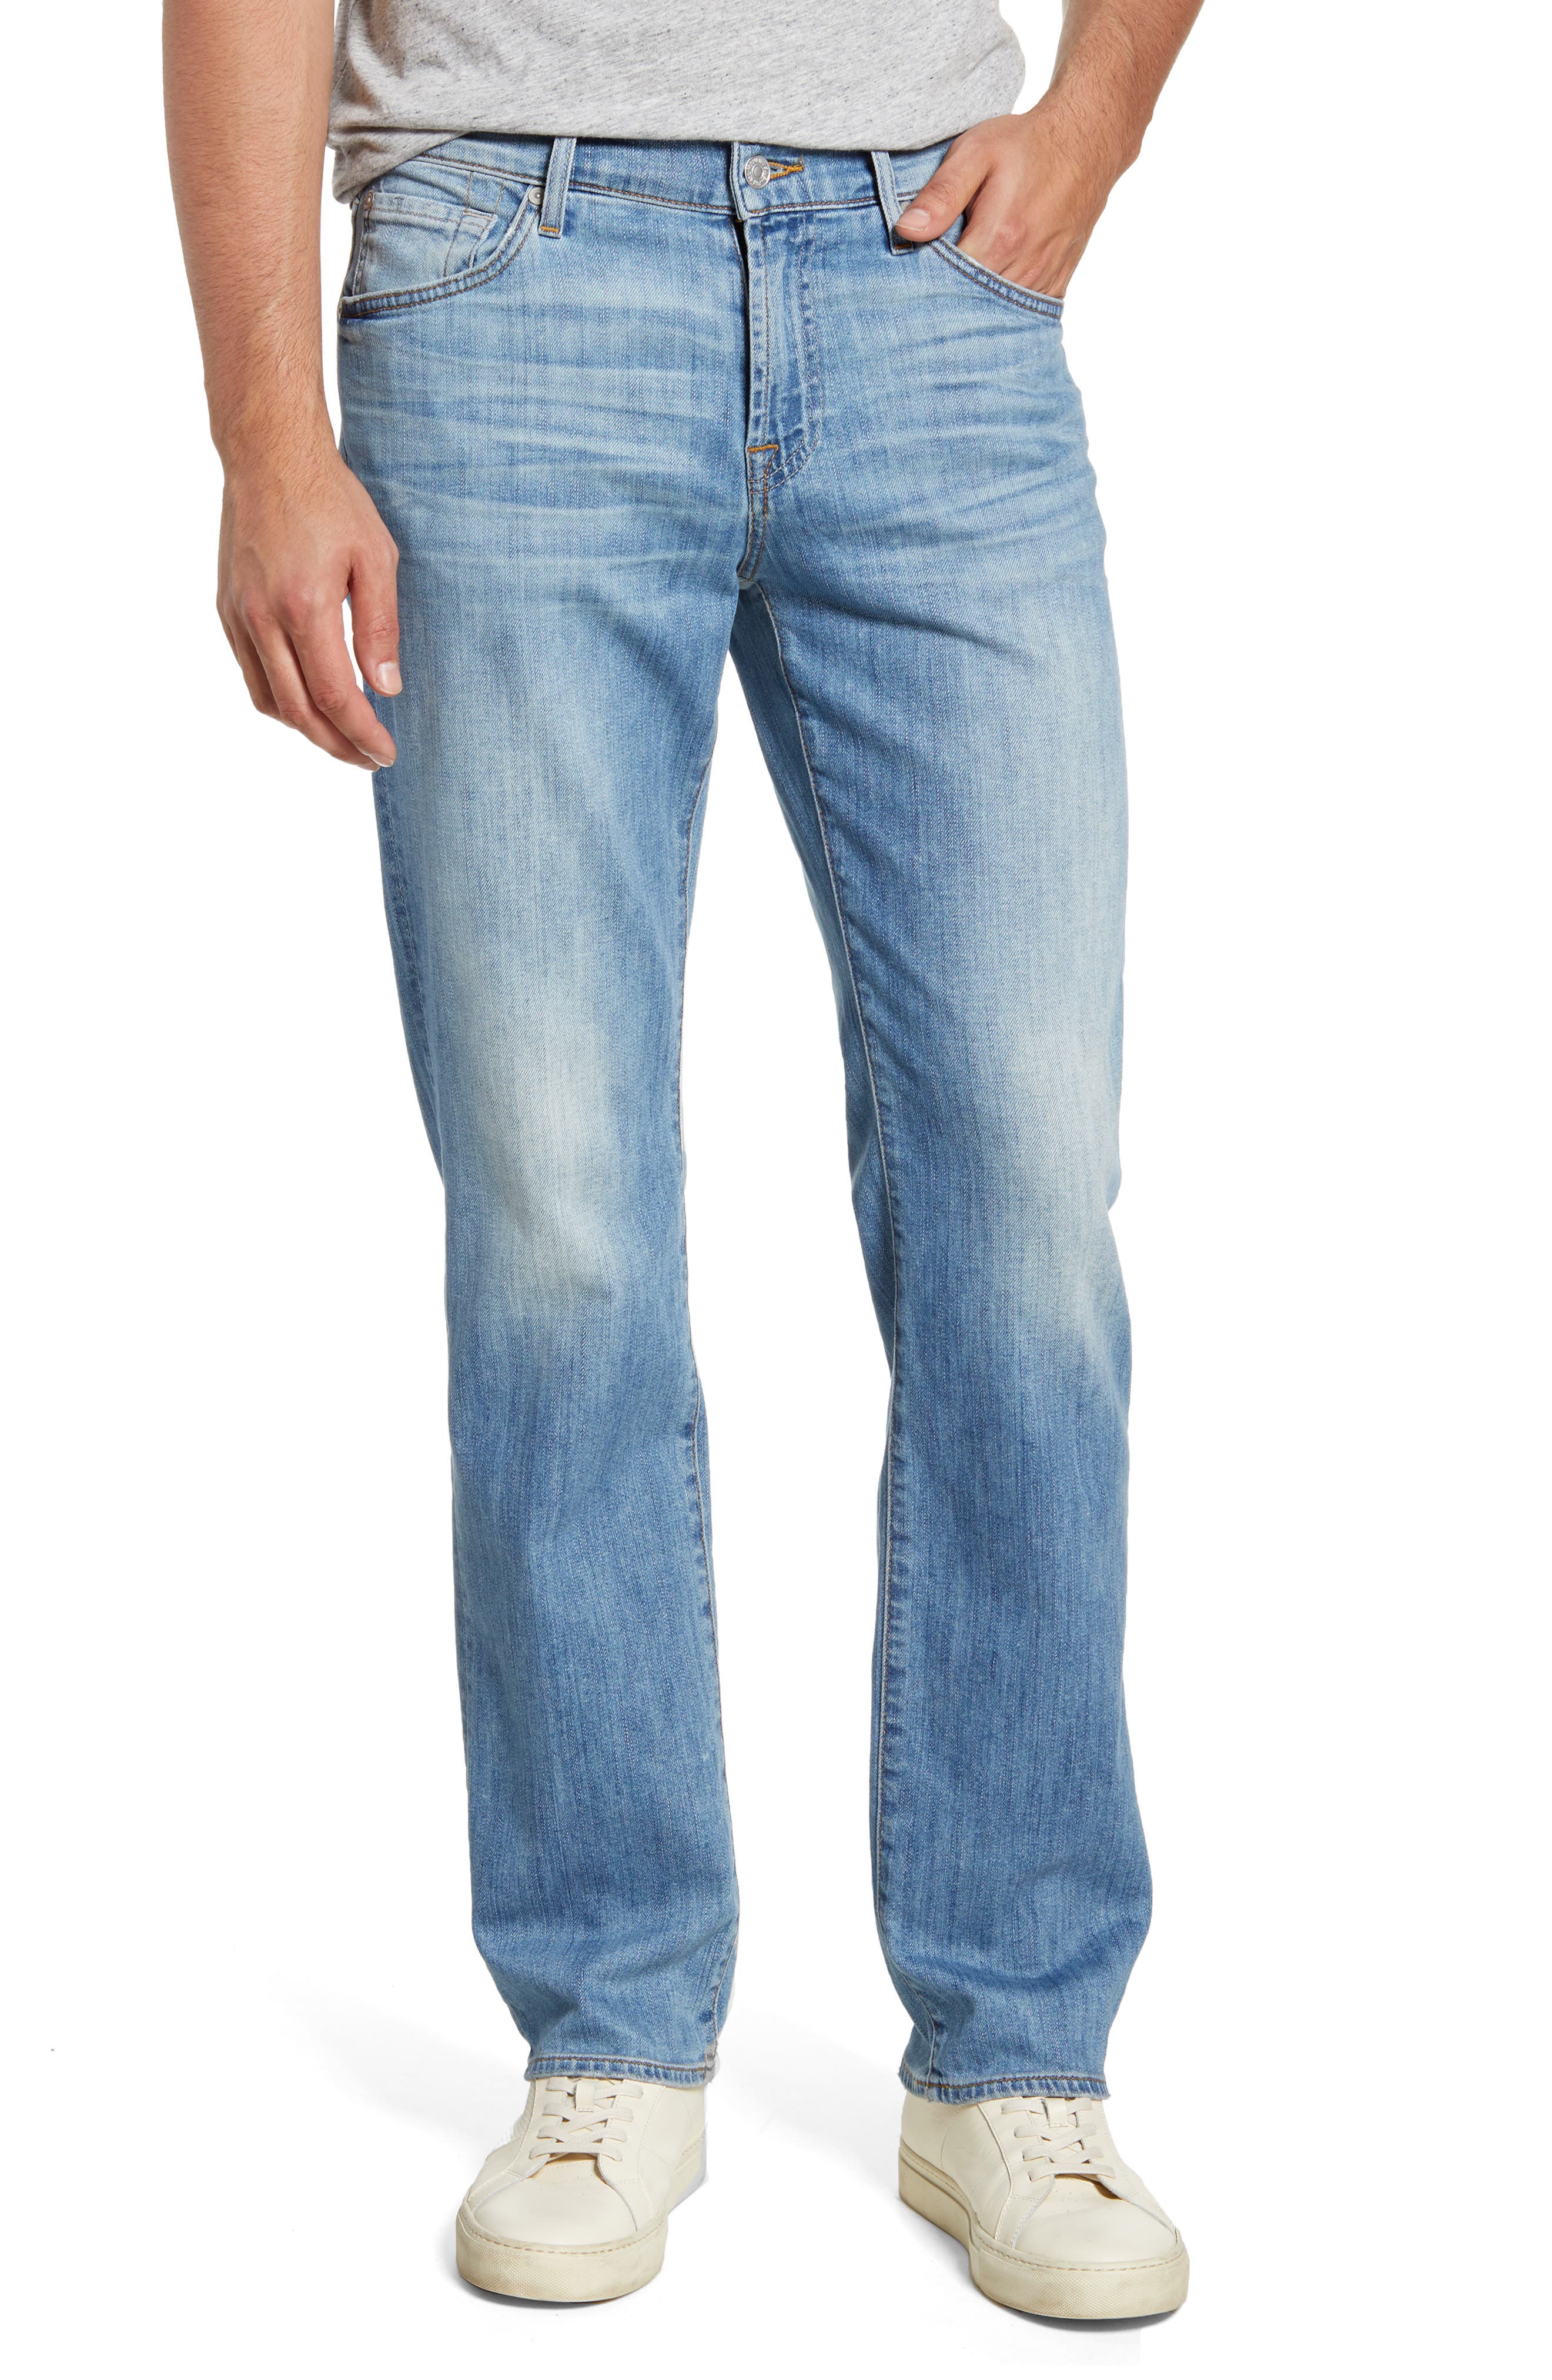 Men's 7 For All Mankind Jeans